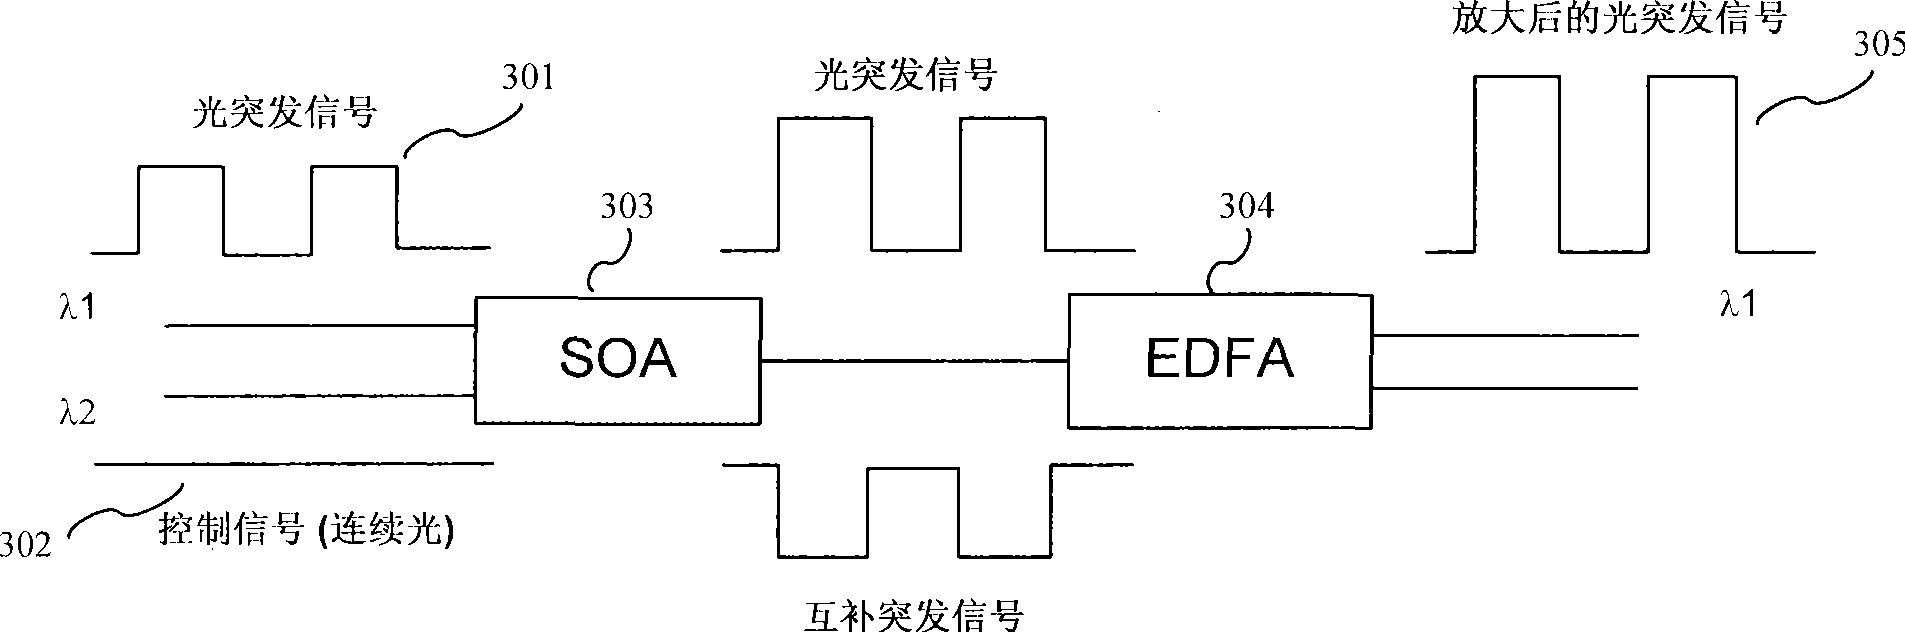 Completely optical burst amplifier in optical network based on SOA intersecting gain modulation effect